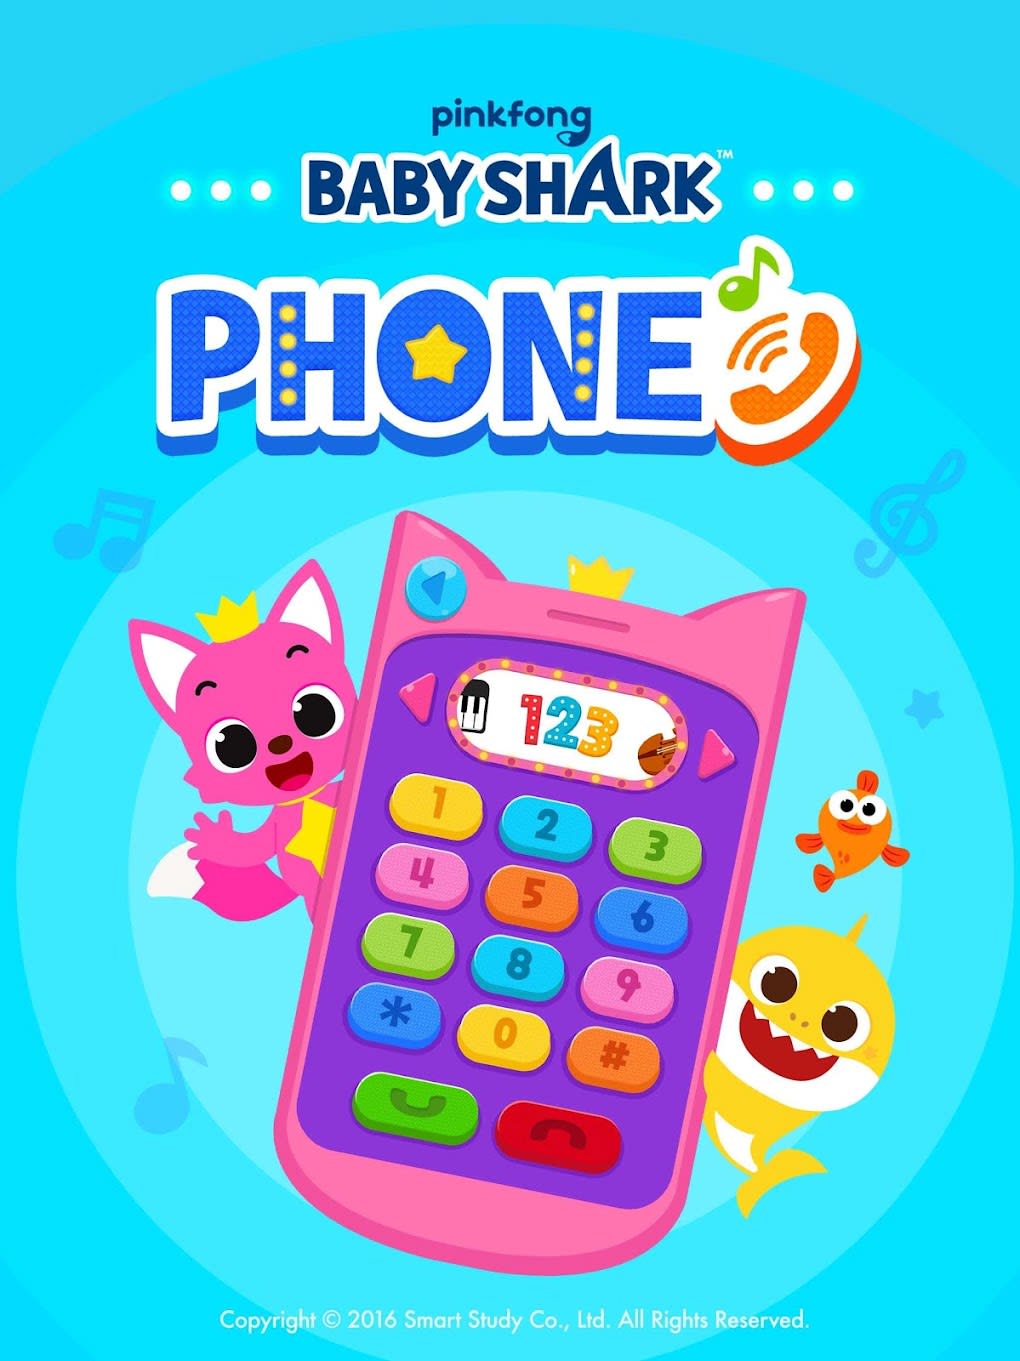 Play Pinkfong Baby Shark: Kid Games Online for Free on PC & Mobile